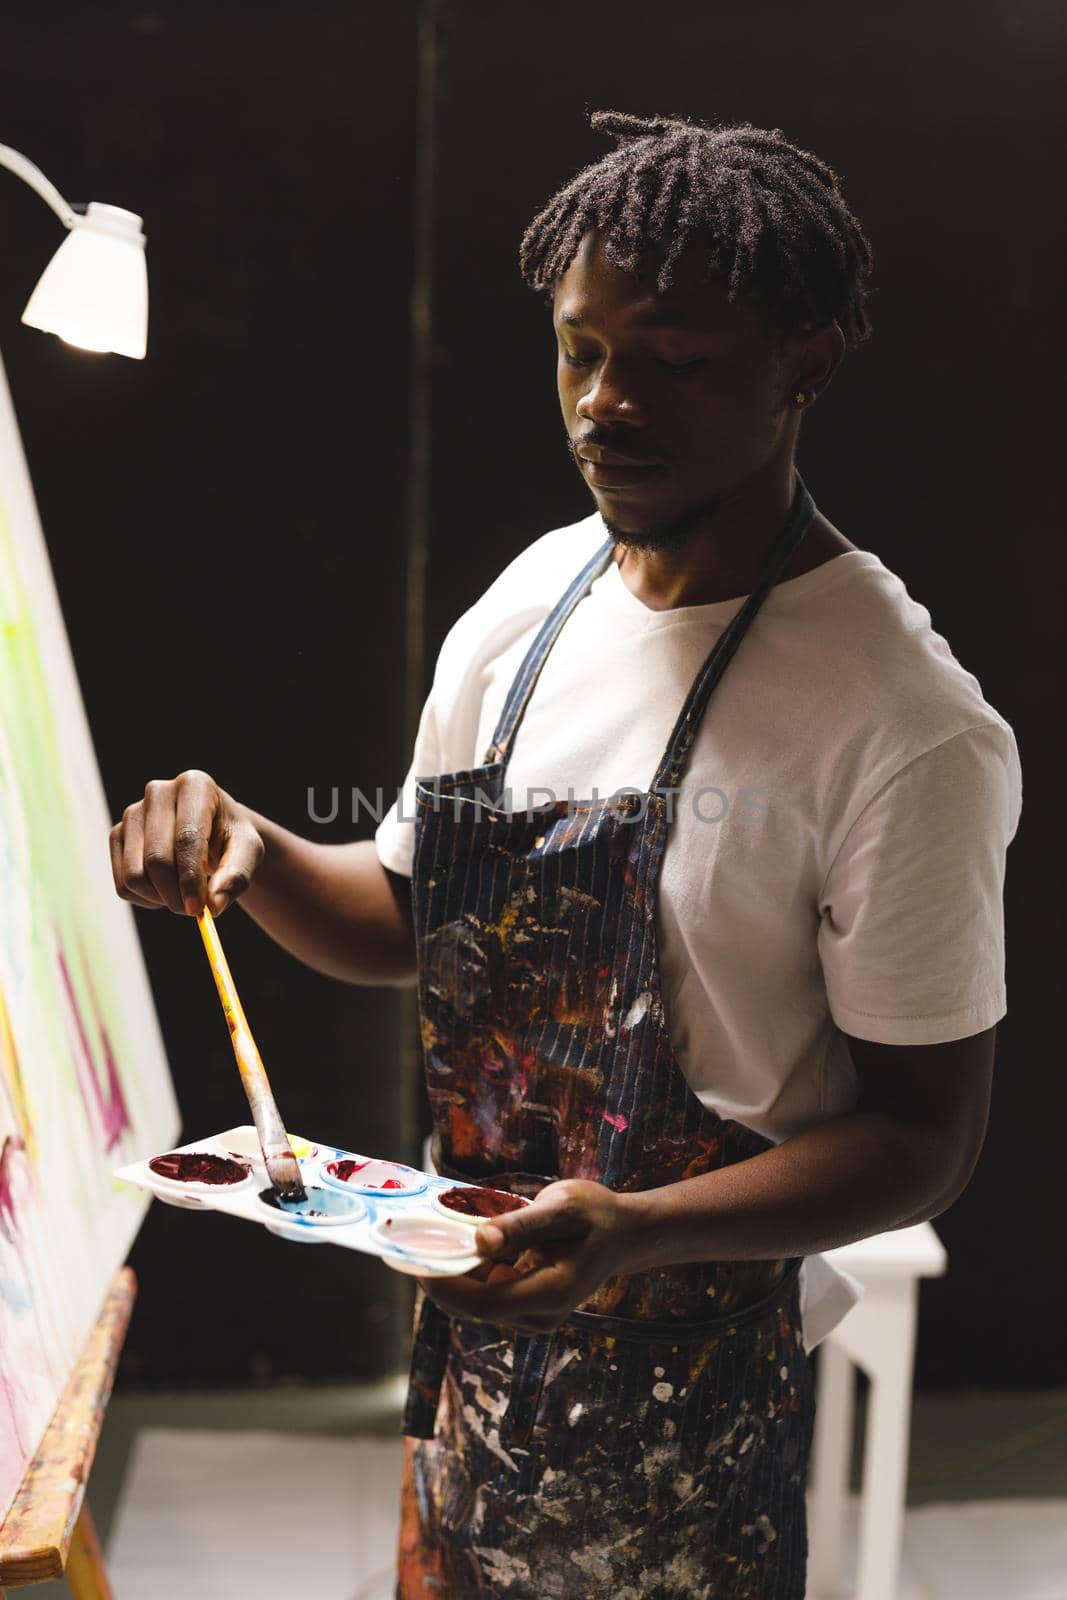 African american male painter at work painting on canvas in art studio. creation and inspiration at an artists painting studio.